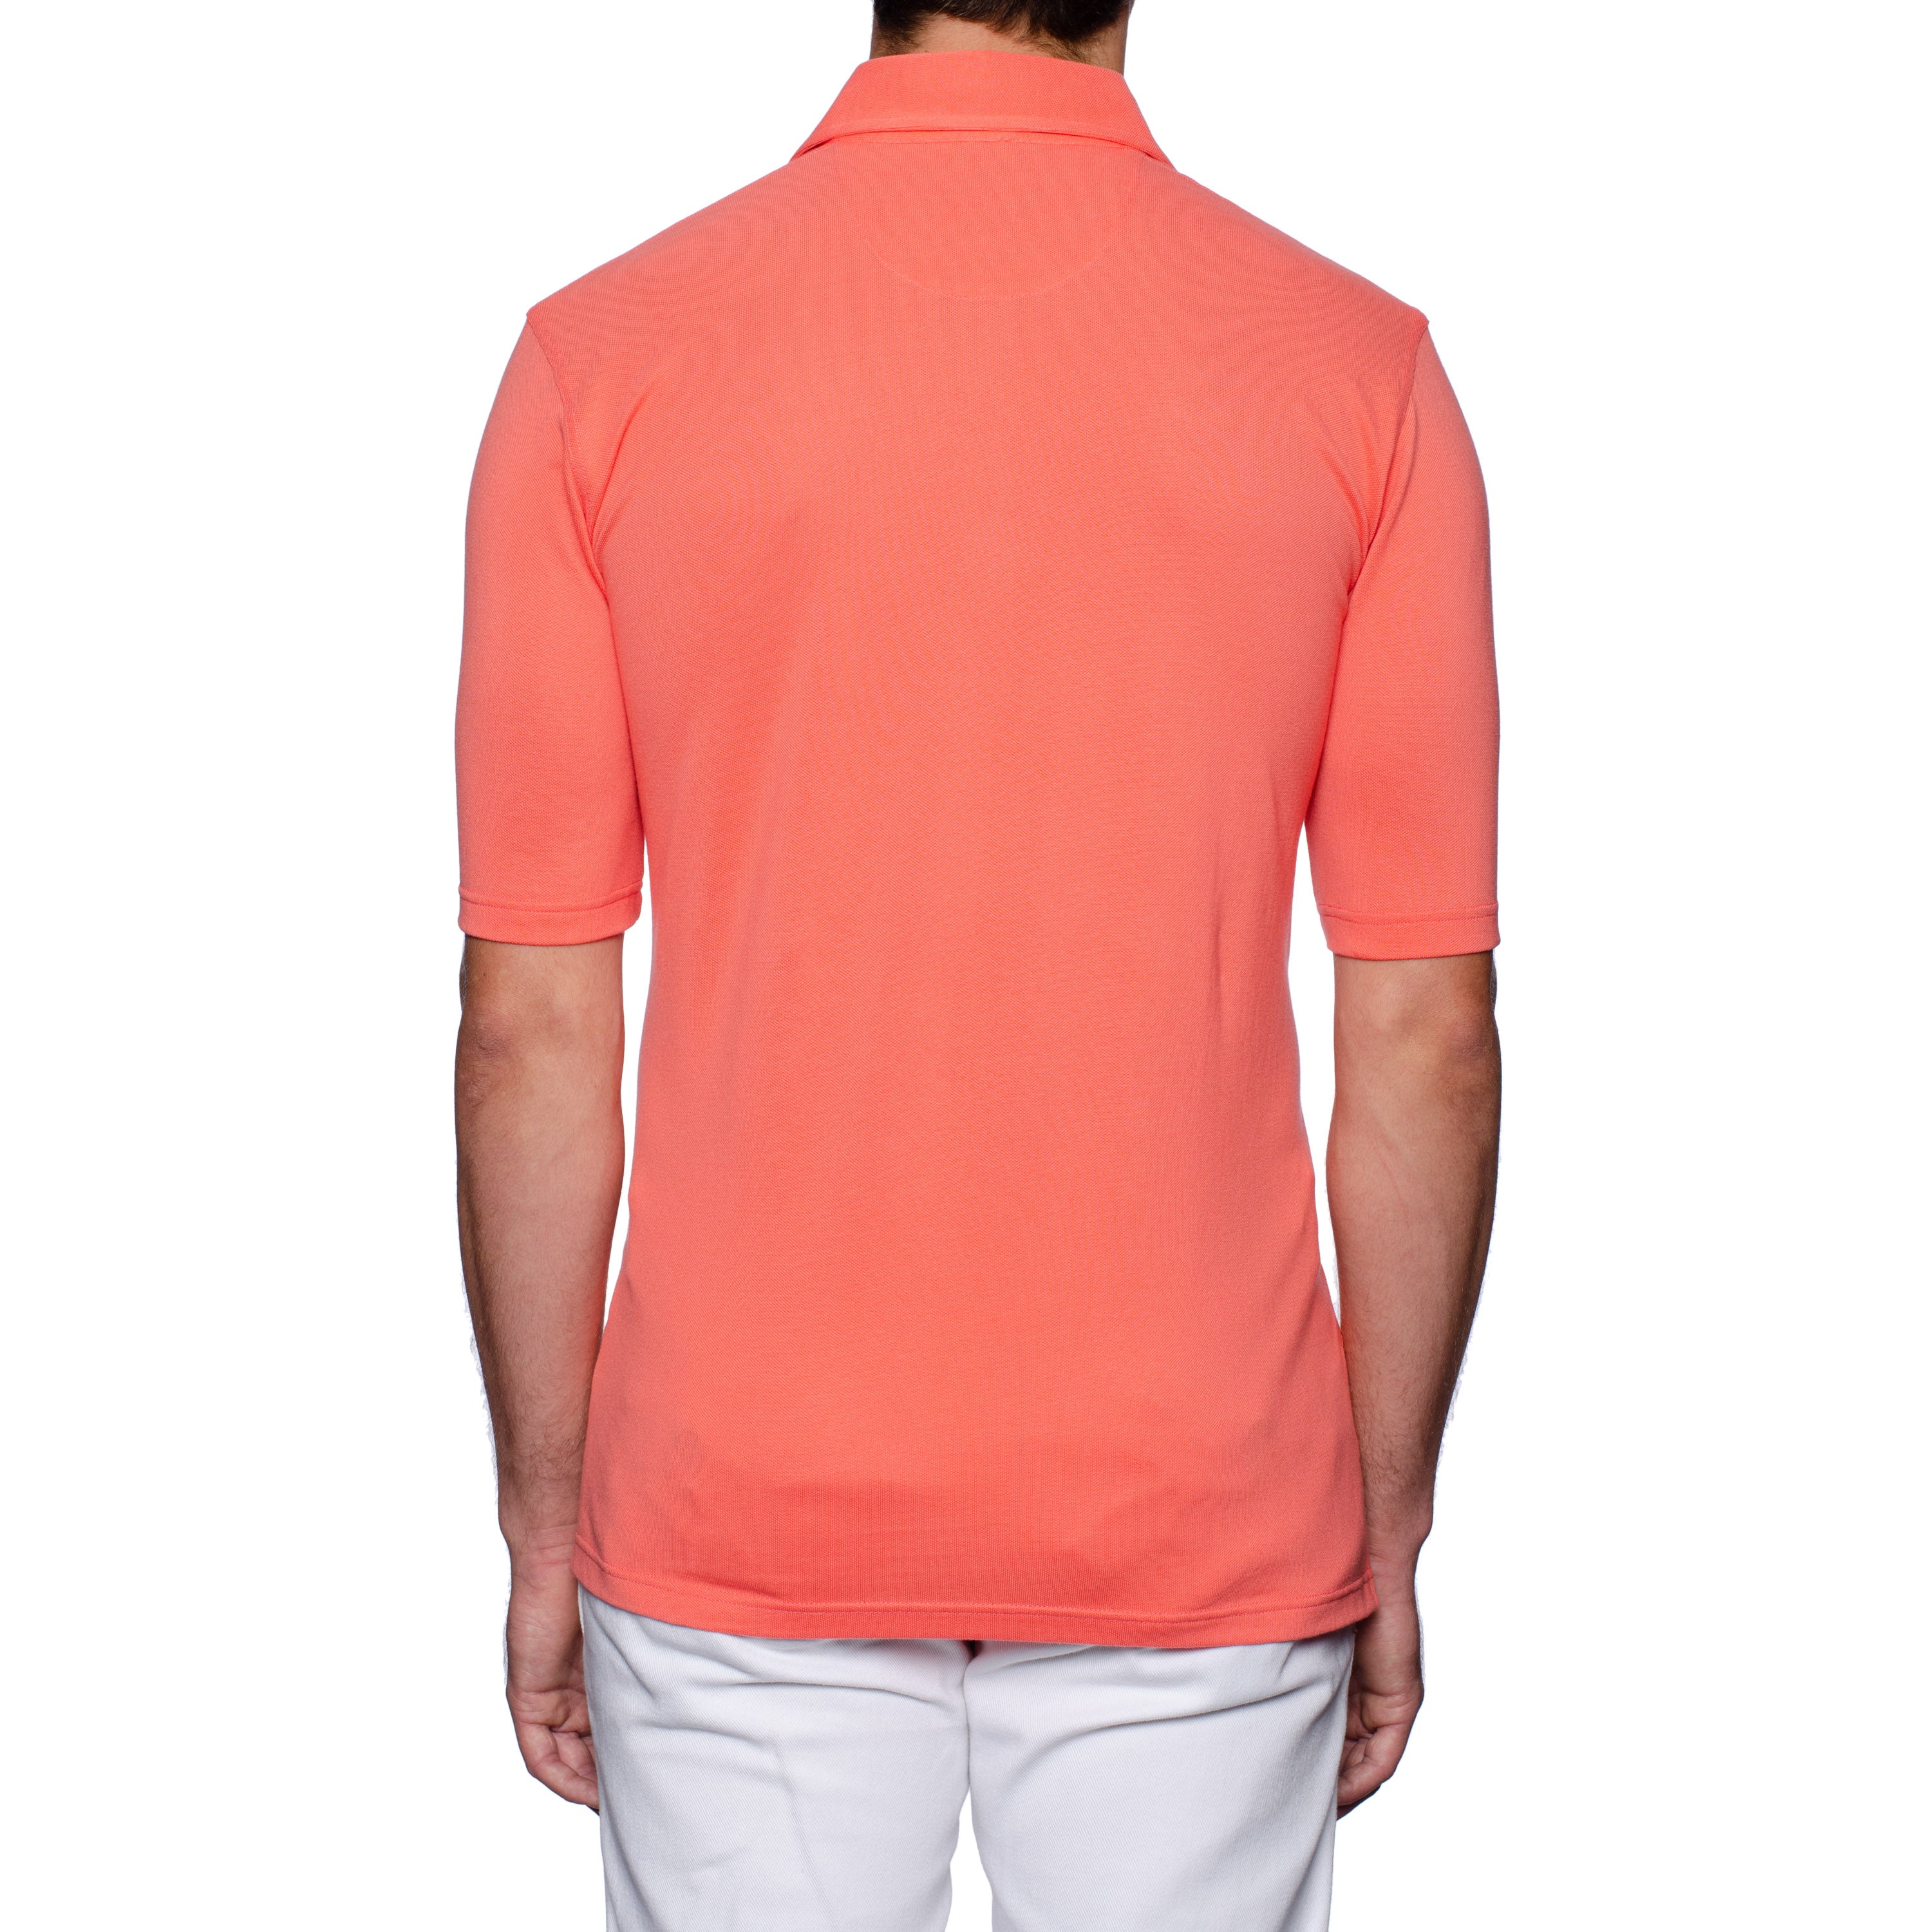 FEDELI "North" Salmon Cotton Pique Frosted Short Sleeve Polo Shirt EU 46 NEW US XS FEDELI